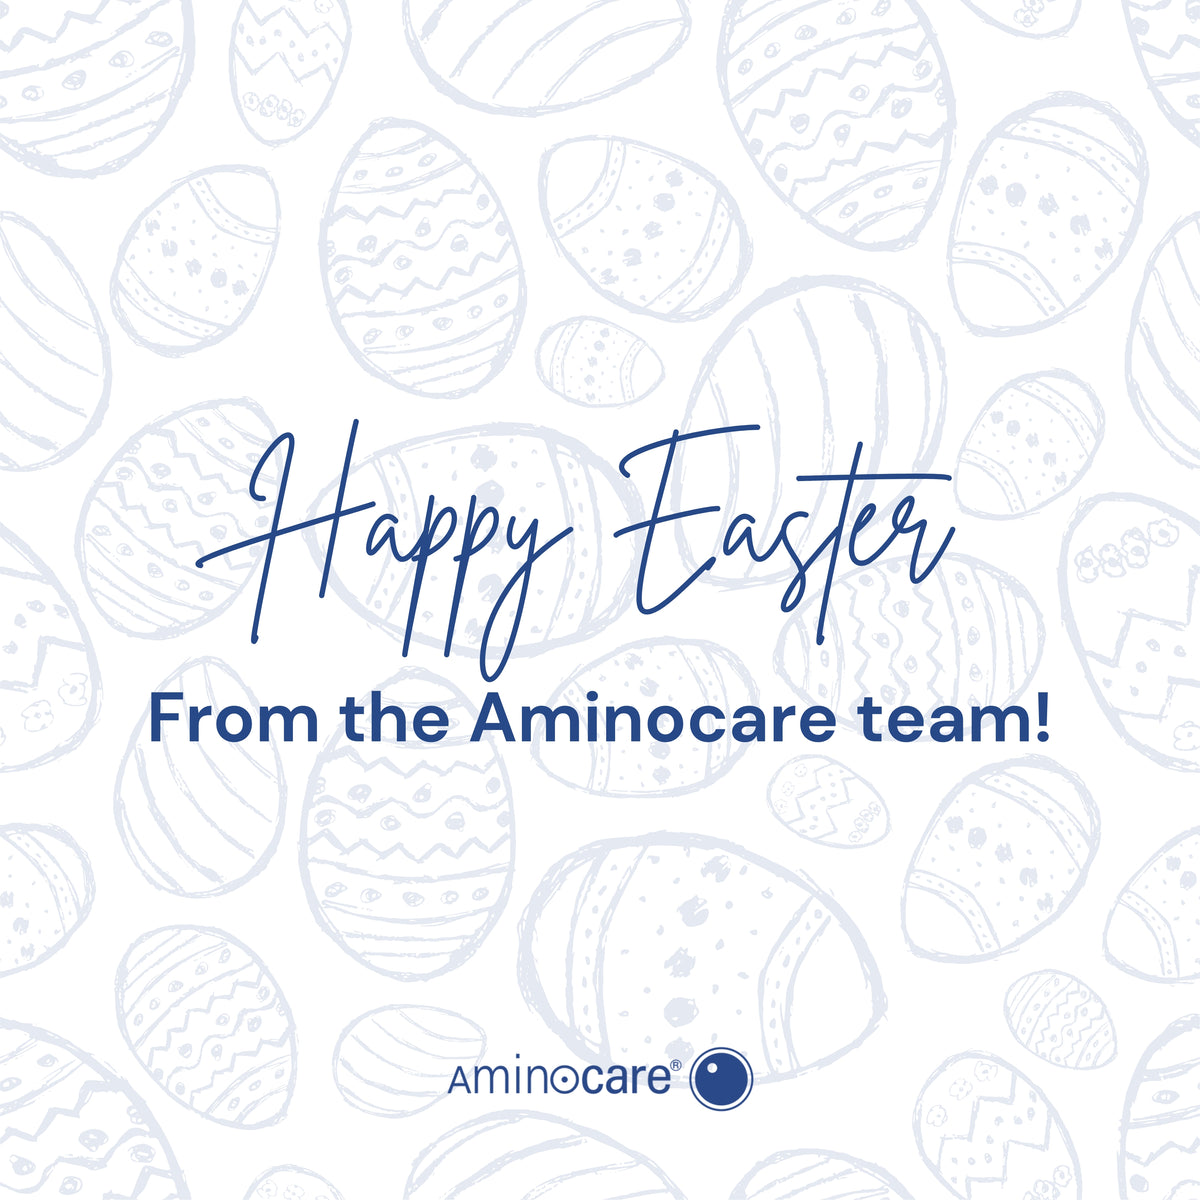 Happy Easter weekend from the Aminocare team!